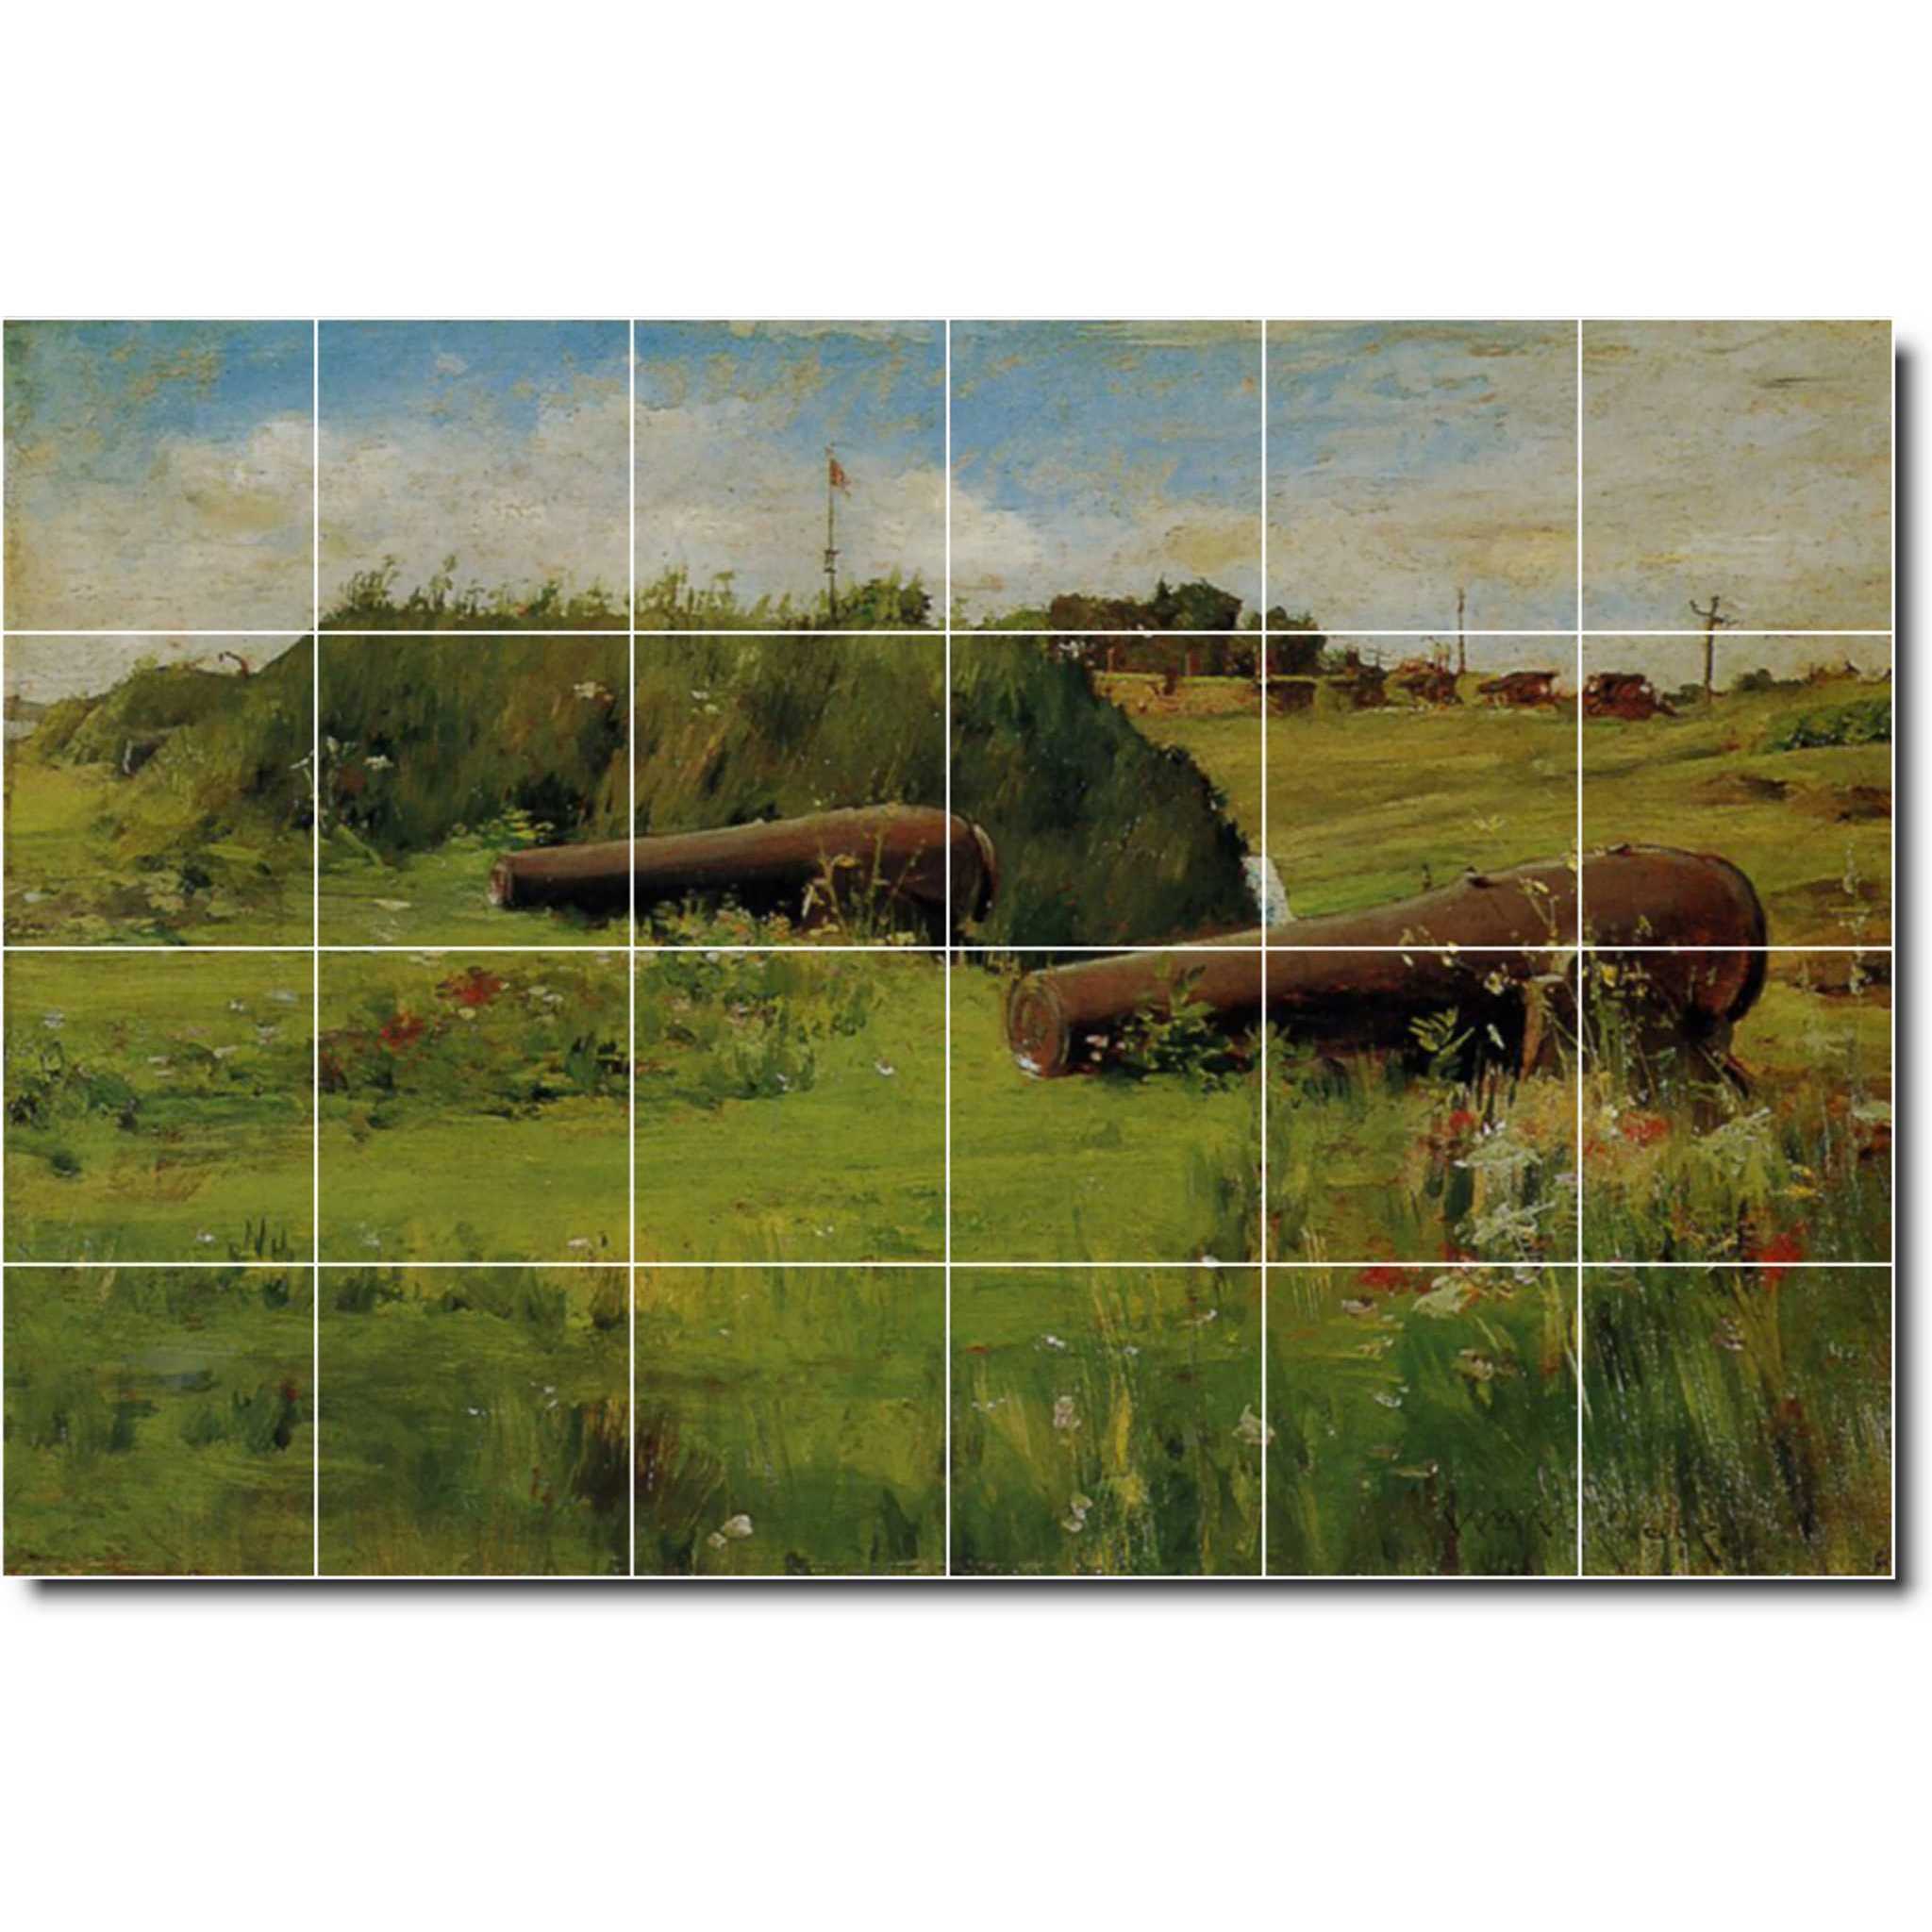 william chase country painting ceramic tile mural p01585